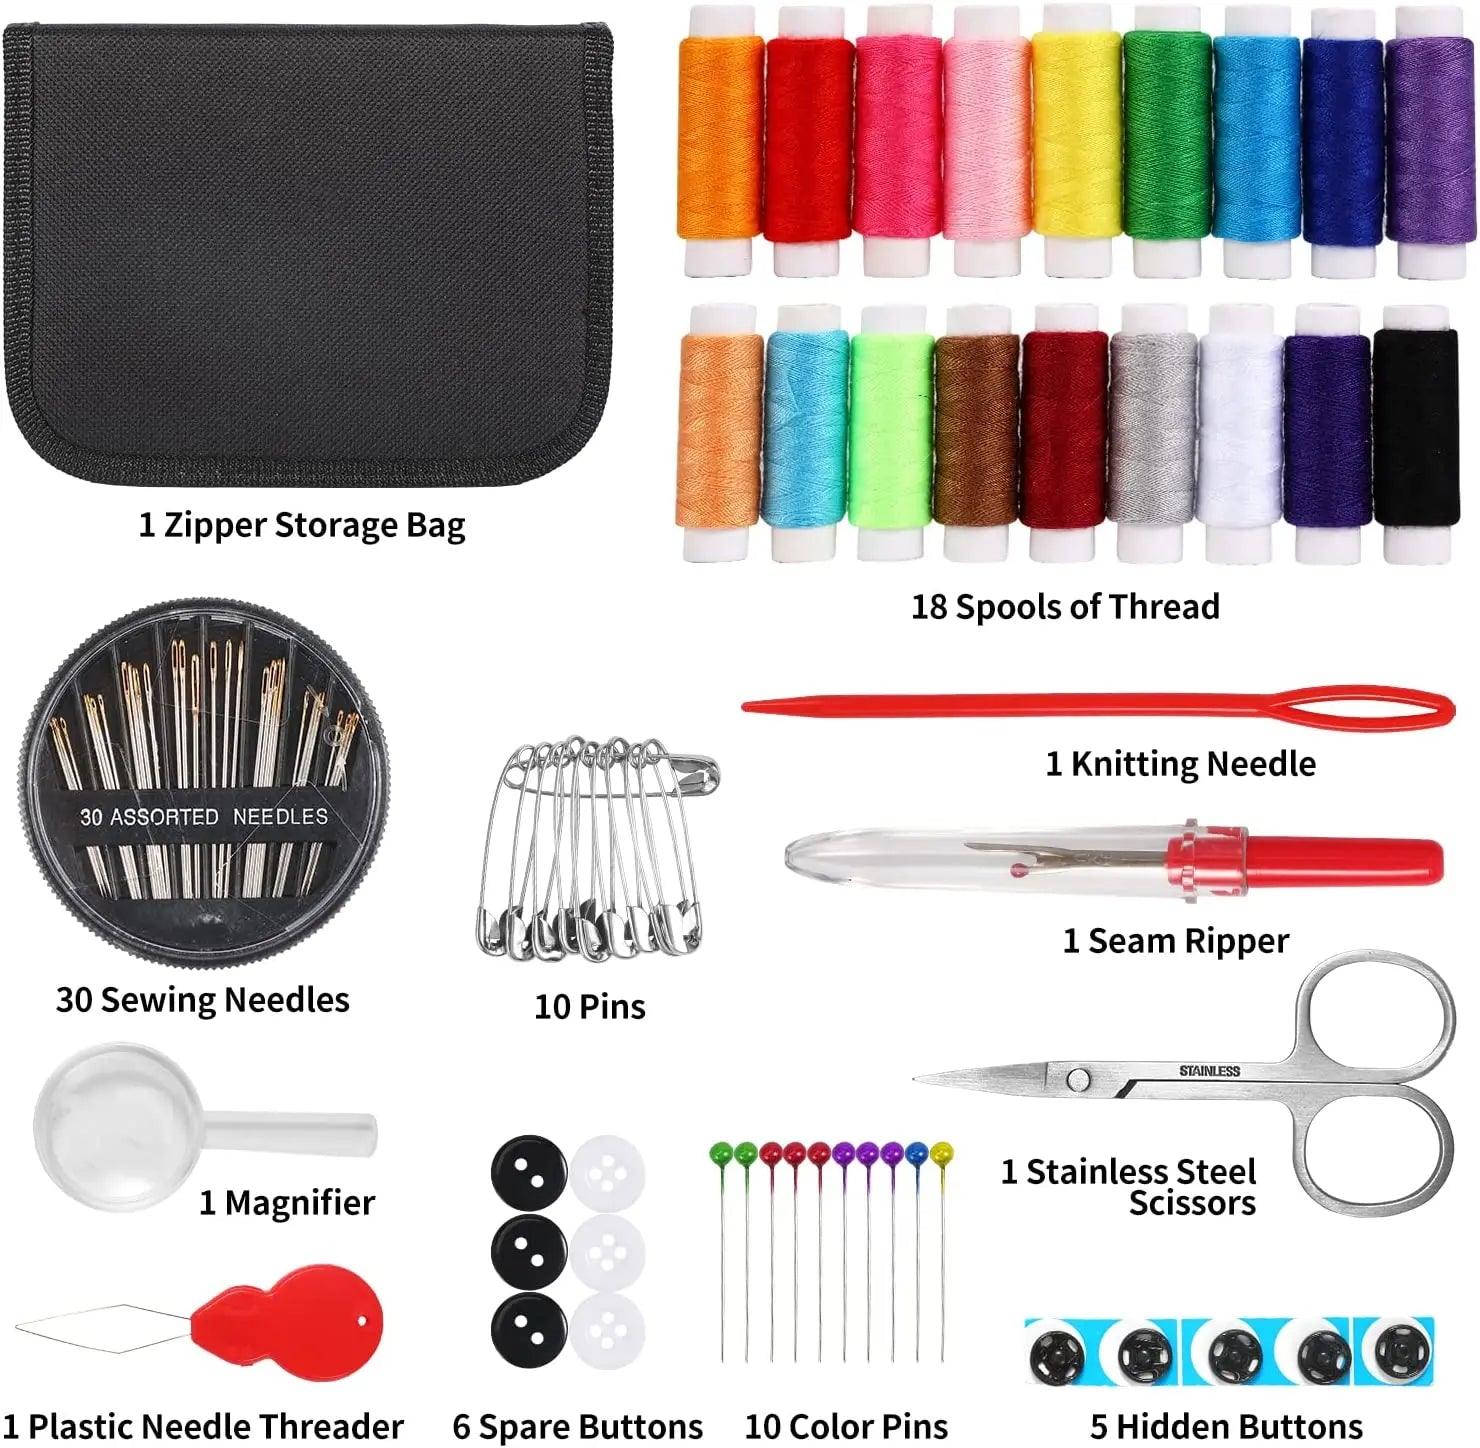 All-in-One Sewing Kit with 100-Yard Threads and Essential Tools for Quick Repairs and DIY Projects  ourlum.com   